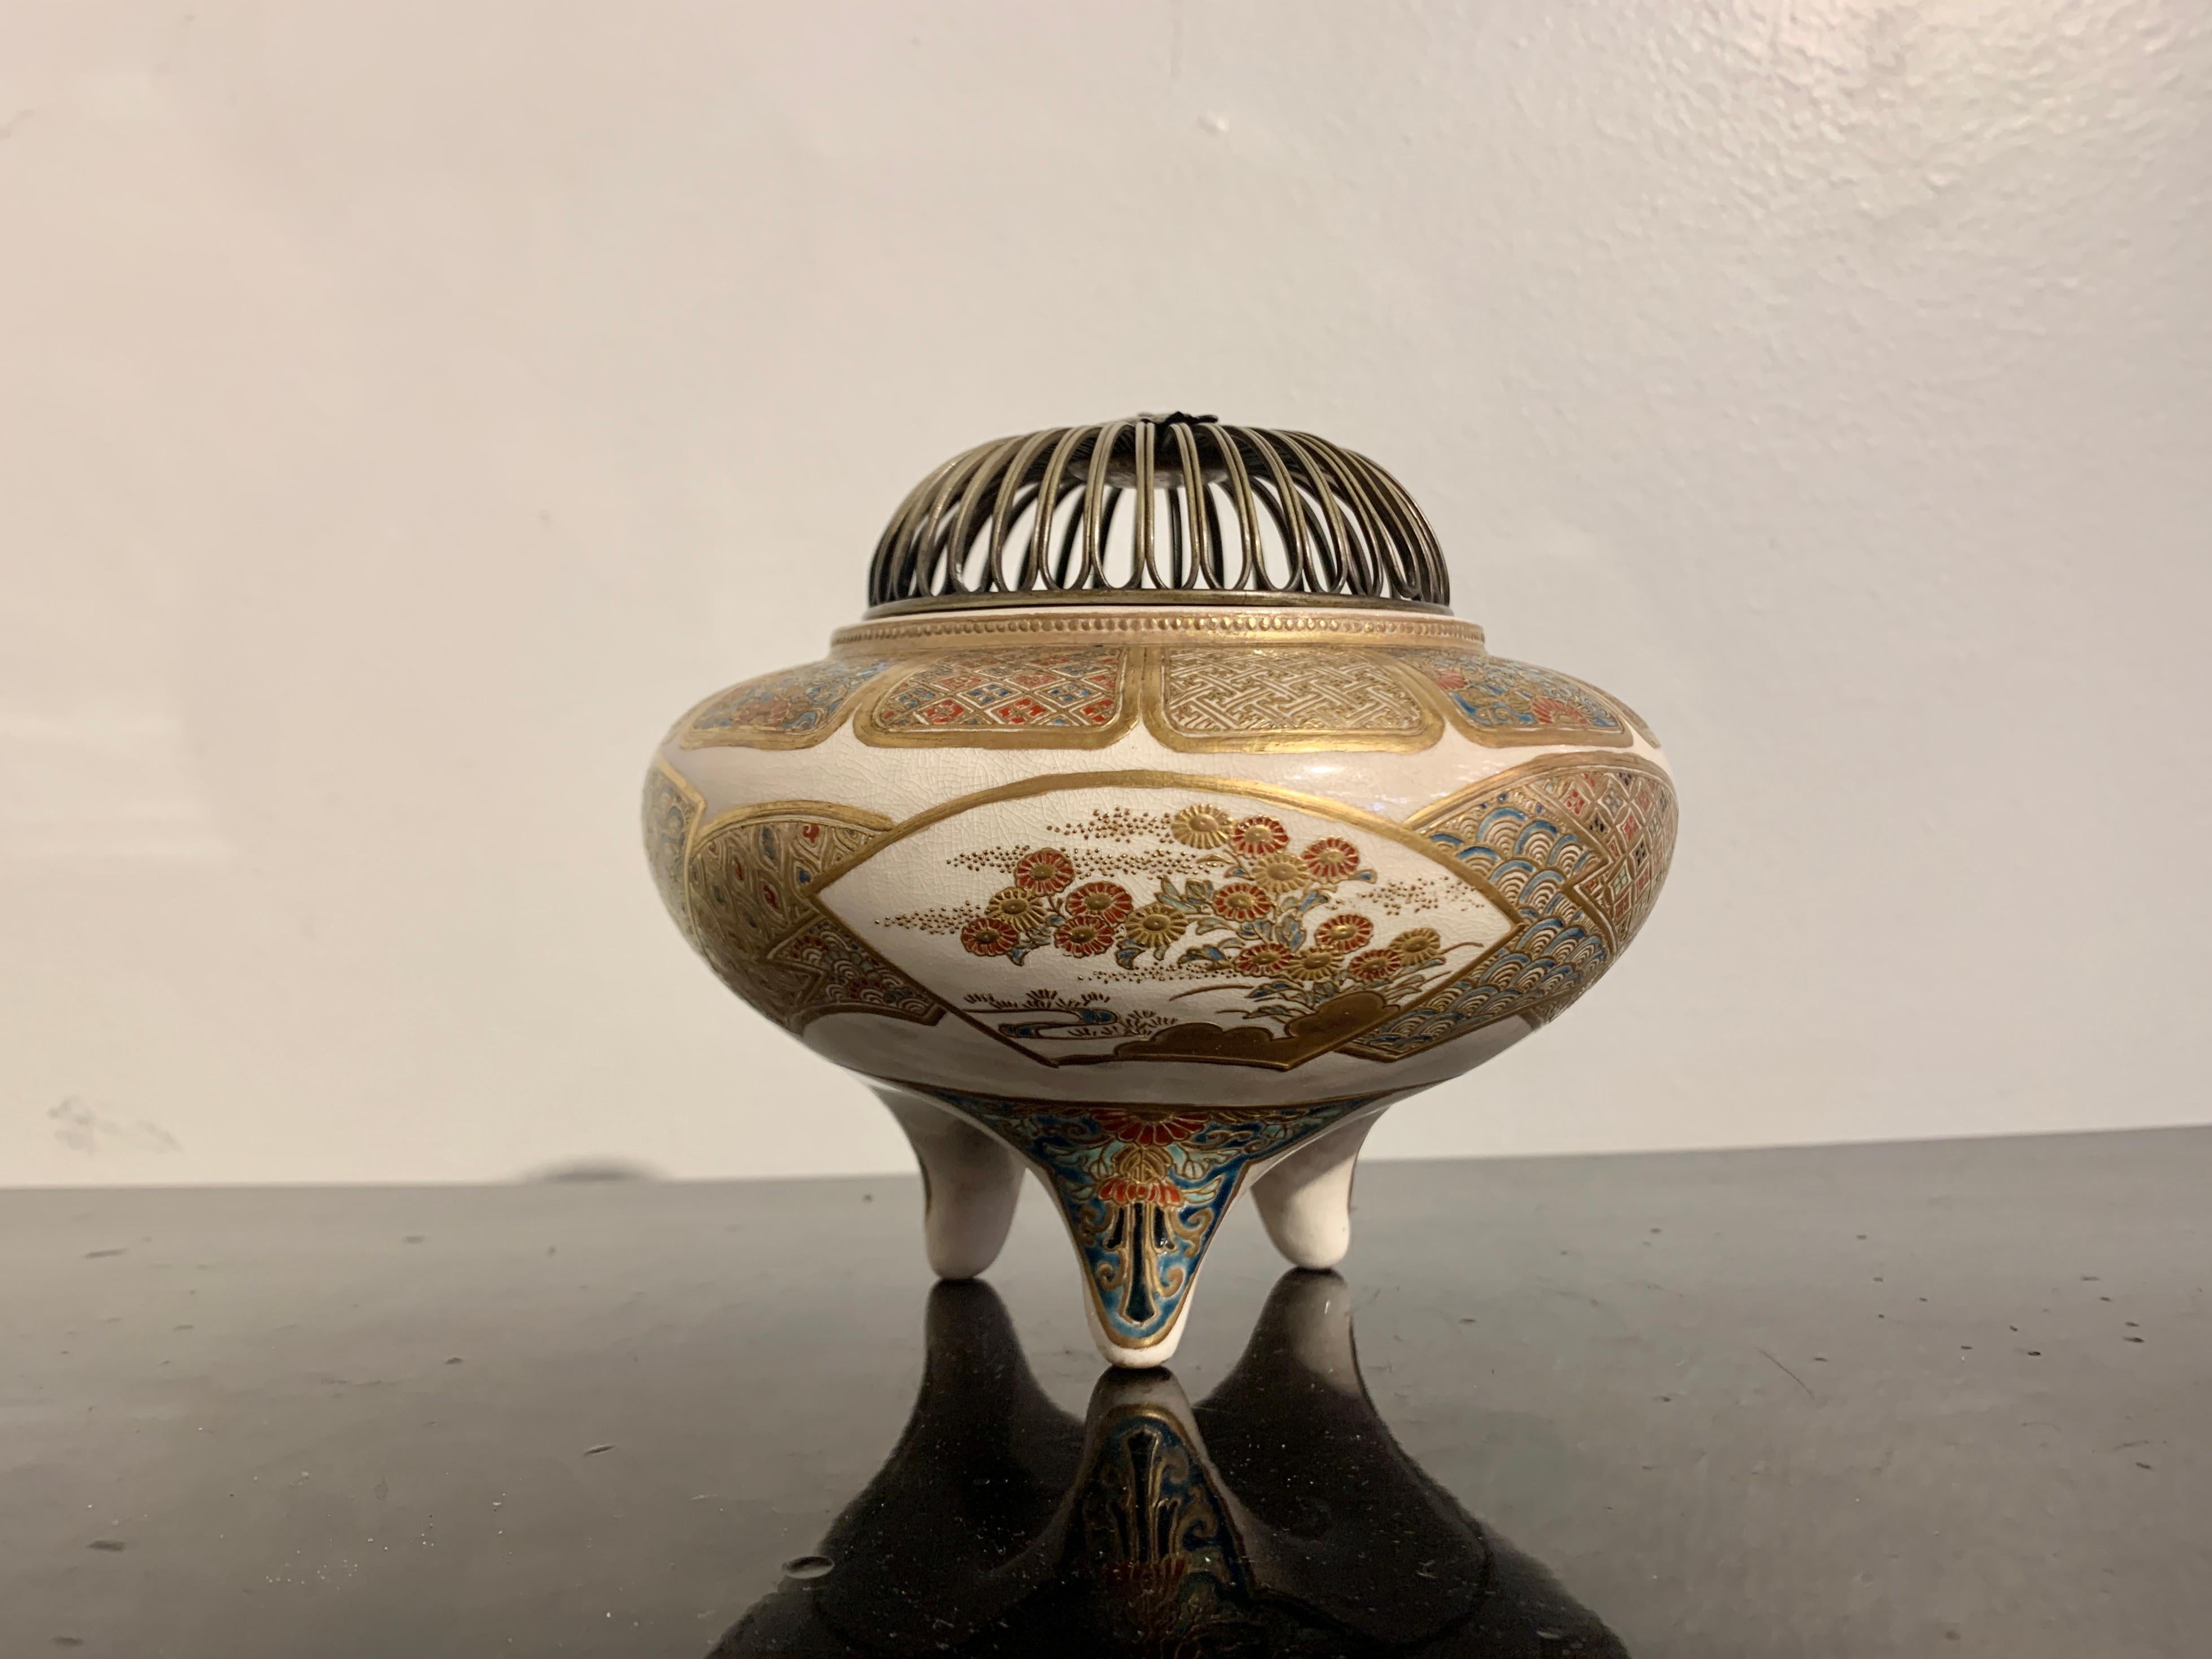 A fine and elegant Japanese Satsuma tripod incense burner, koro, with pierced metal lid, signed Eizan (?) Meiji Period, late 19th century, Japan.

The koro, or censer, features a stoneware body of slightly compressed globular form, supported on